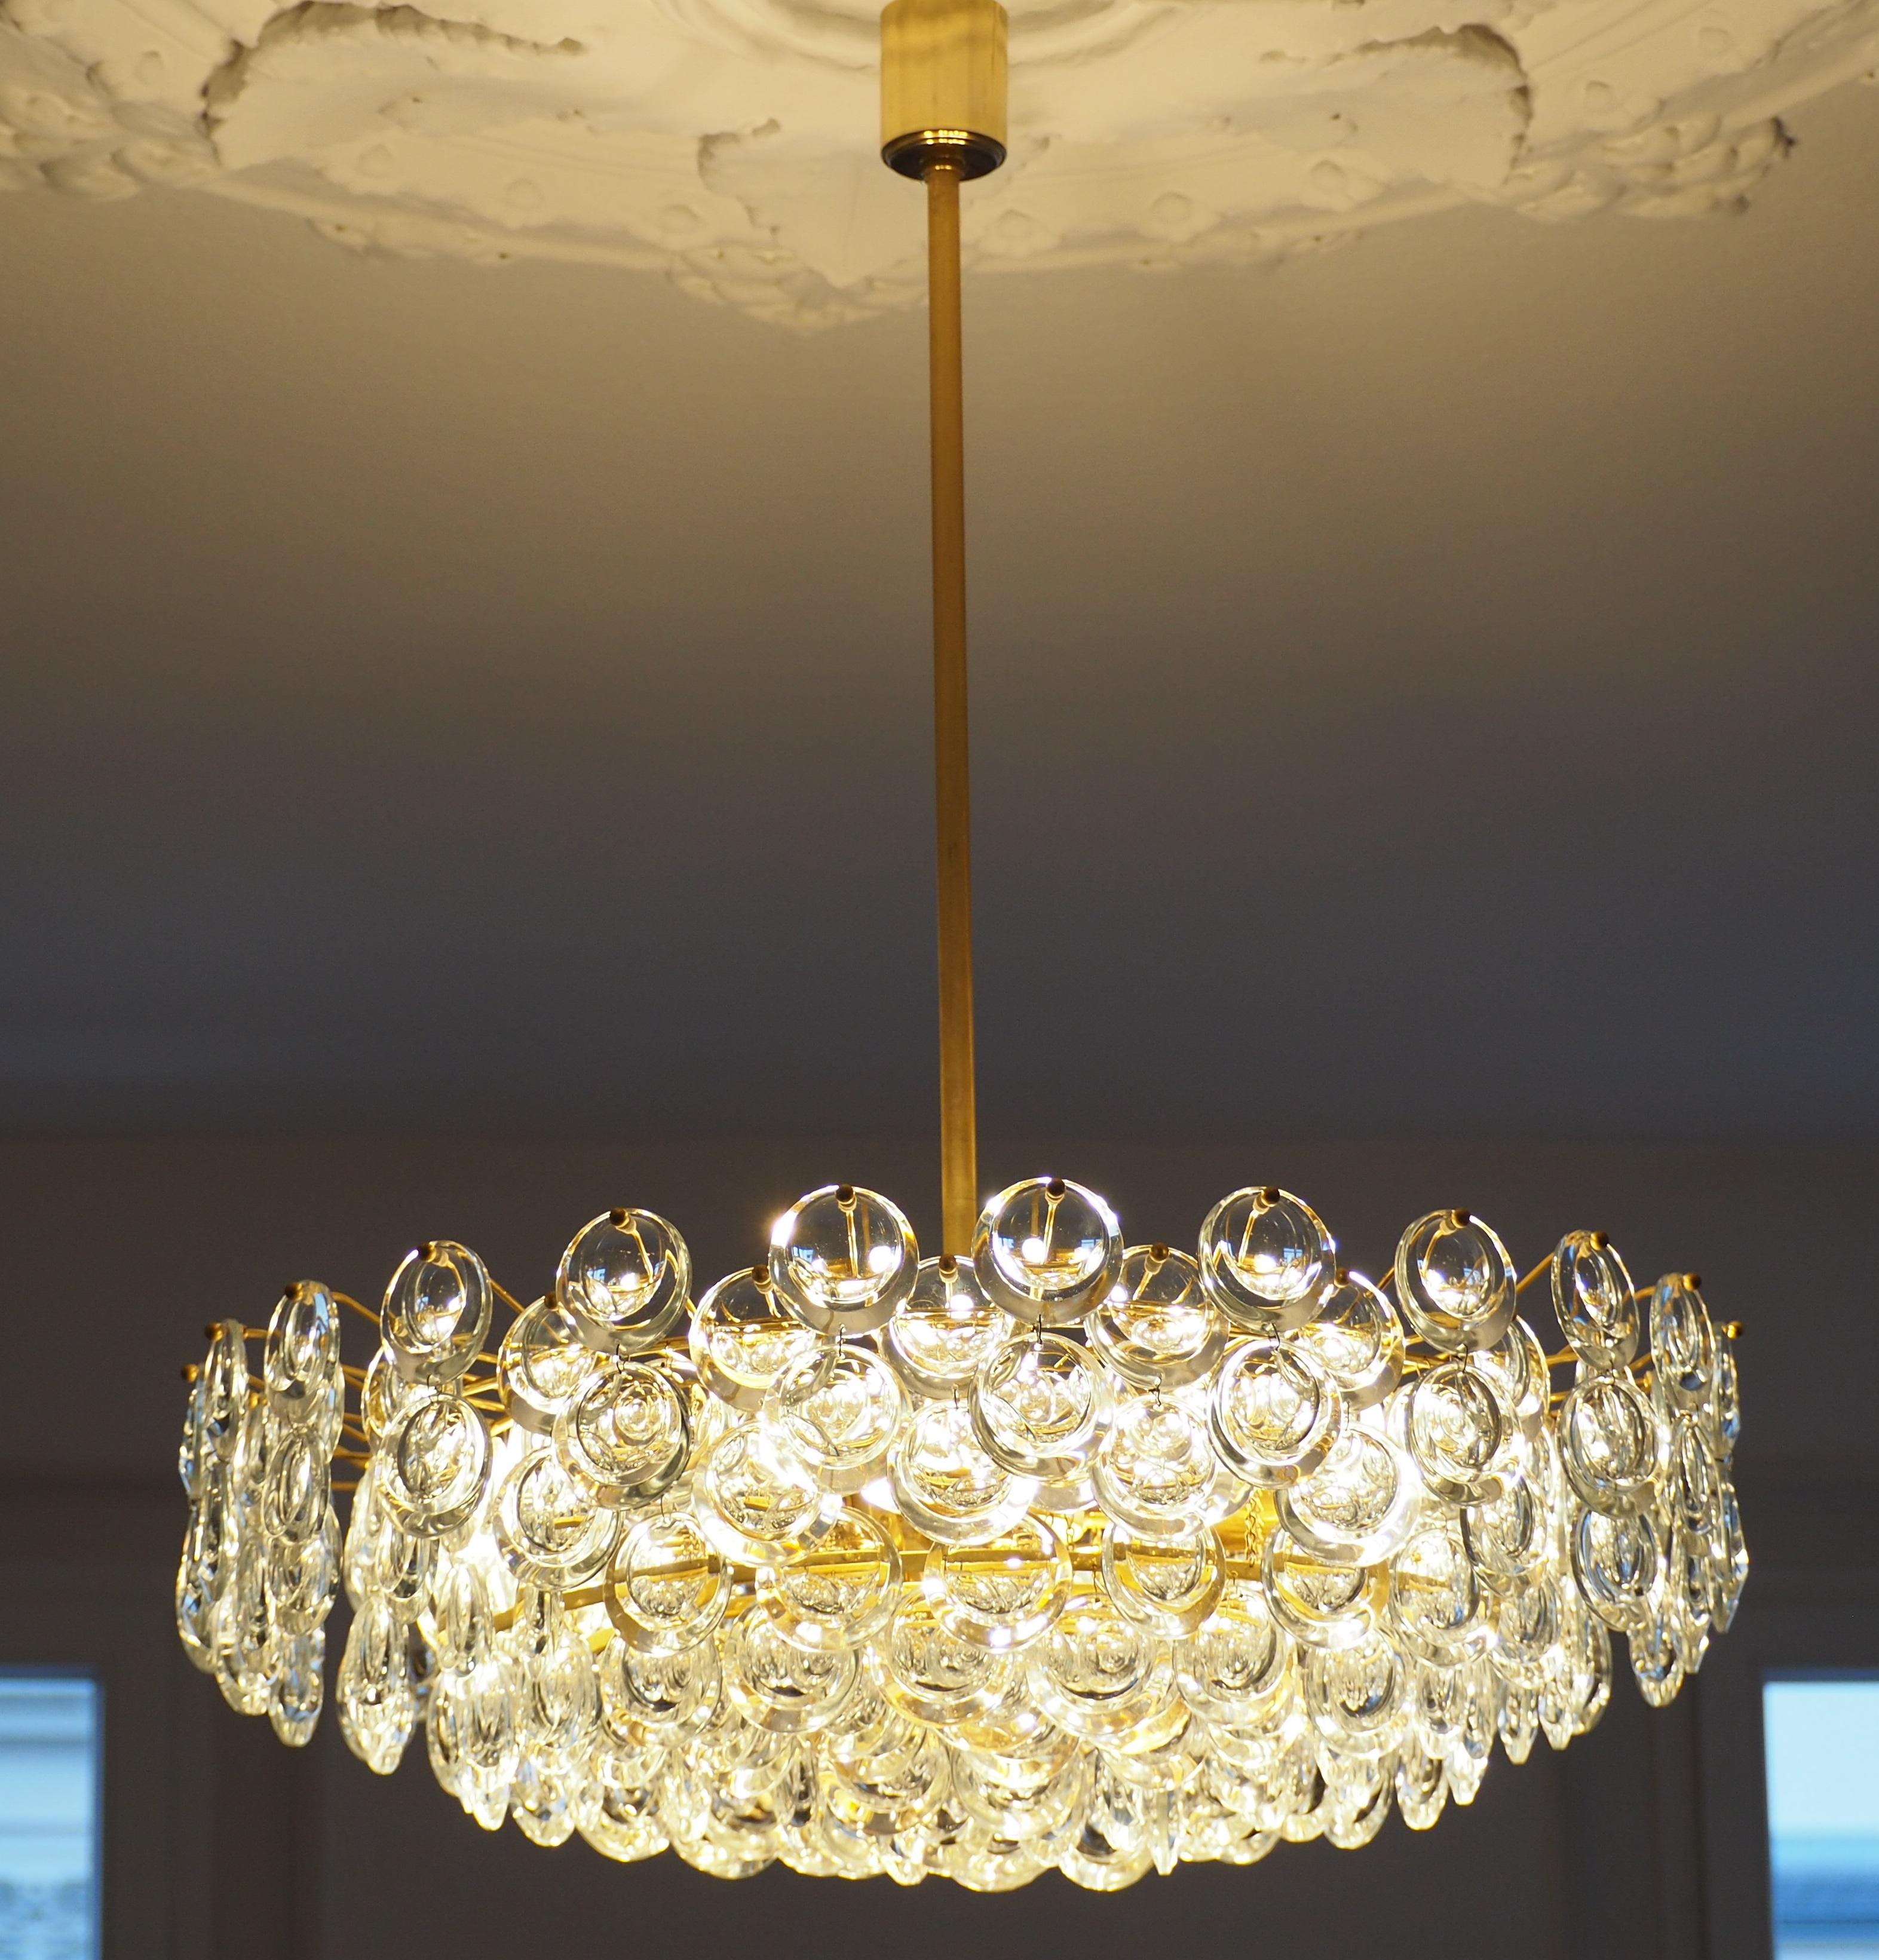 Very Large Gold-Plated and Cut Glass Chandelier by Palwa, circa 1960s For Sale 6